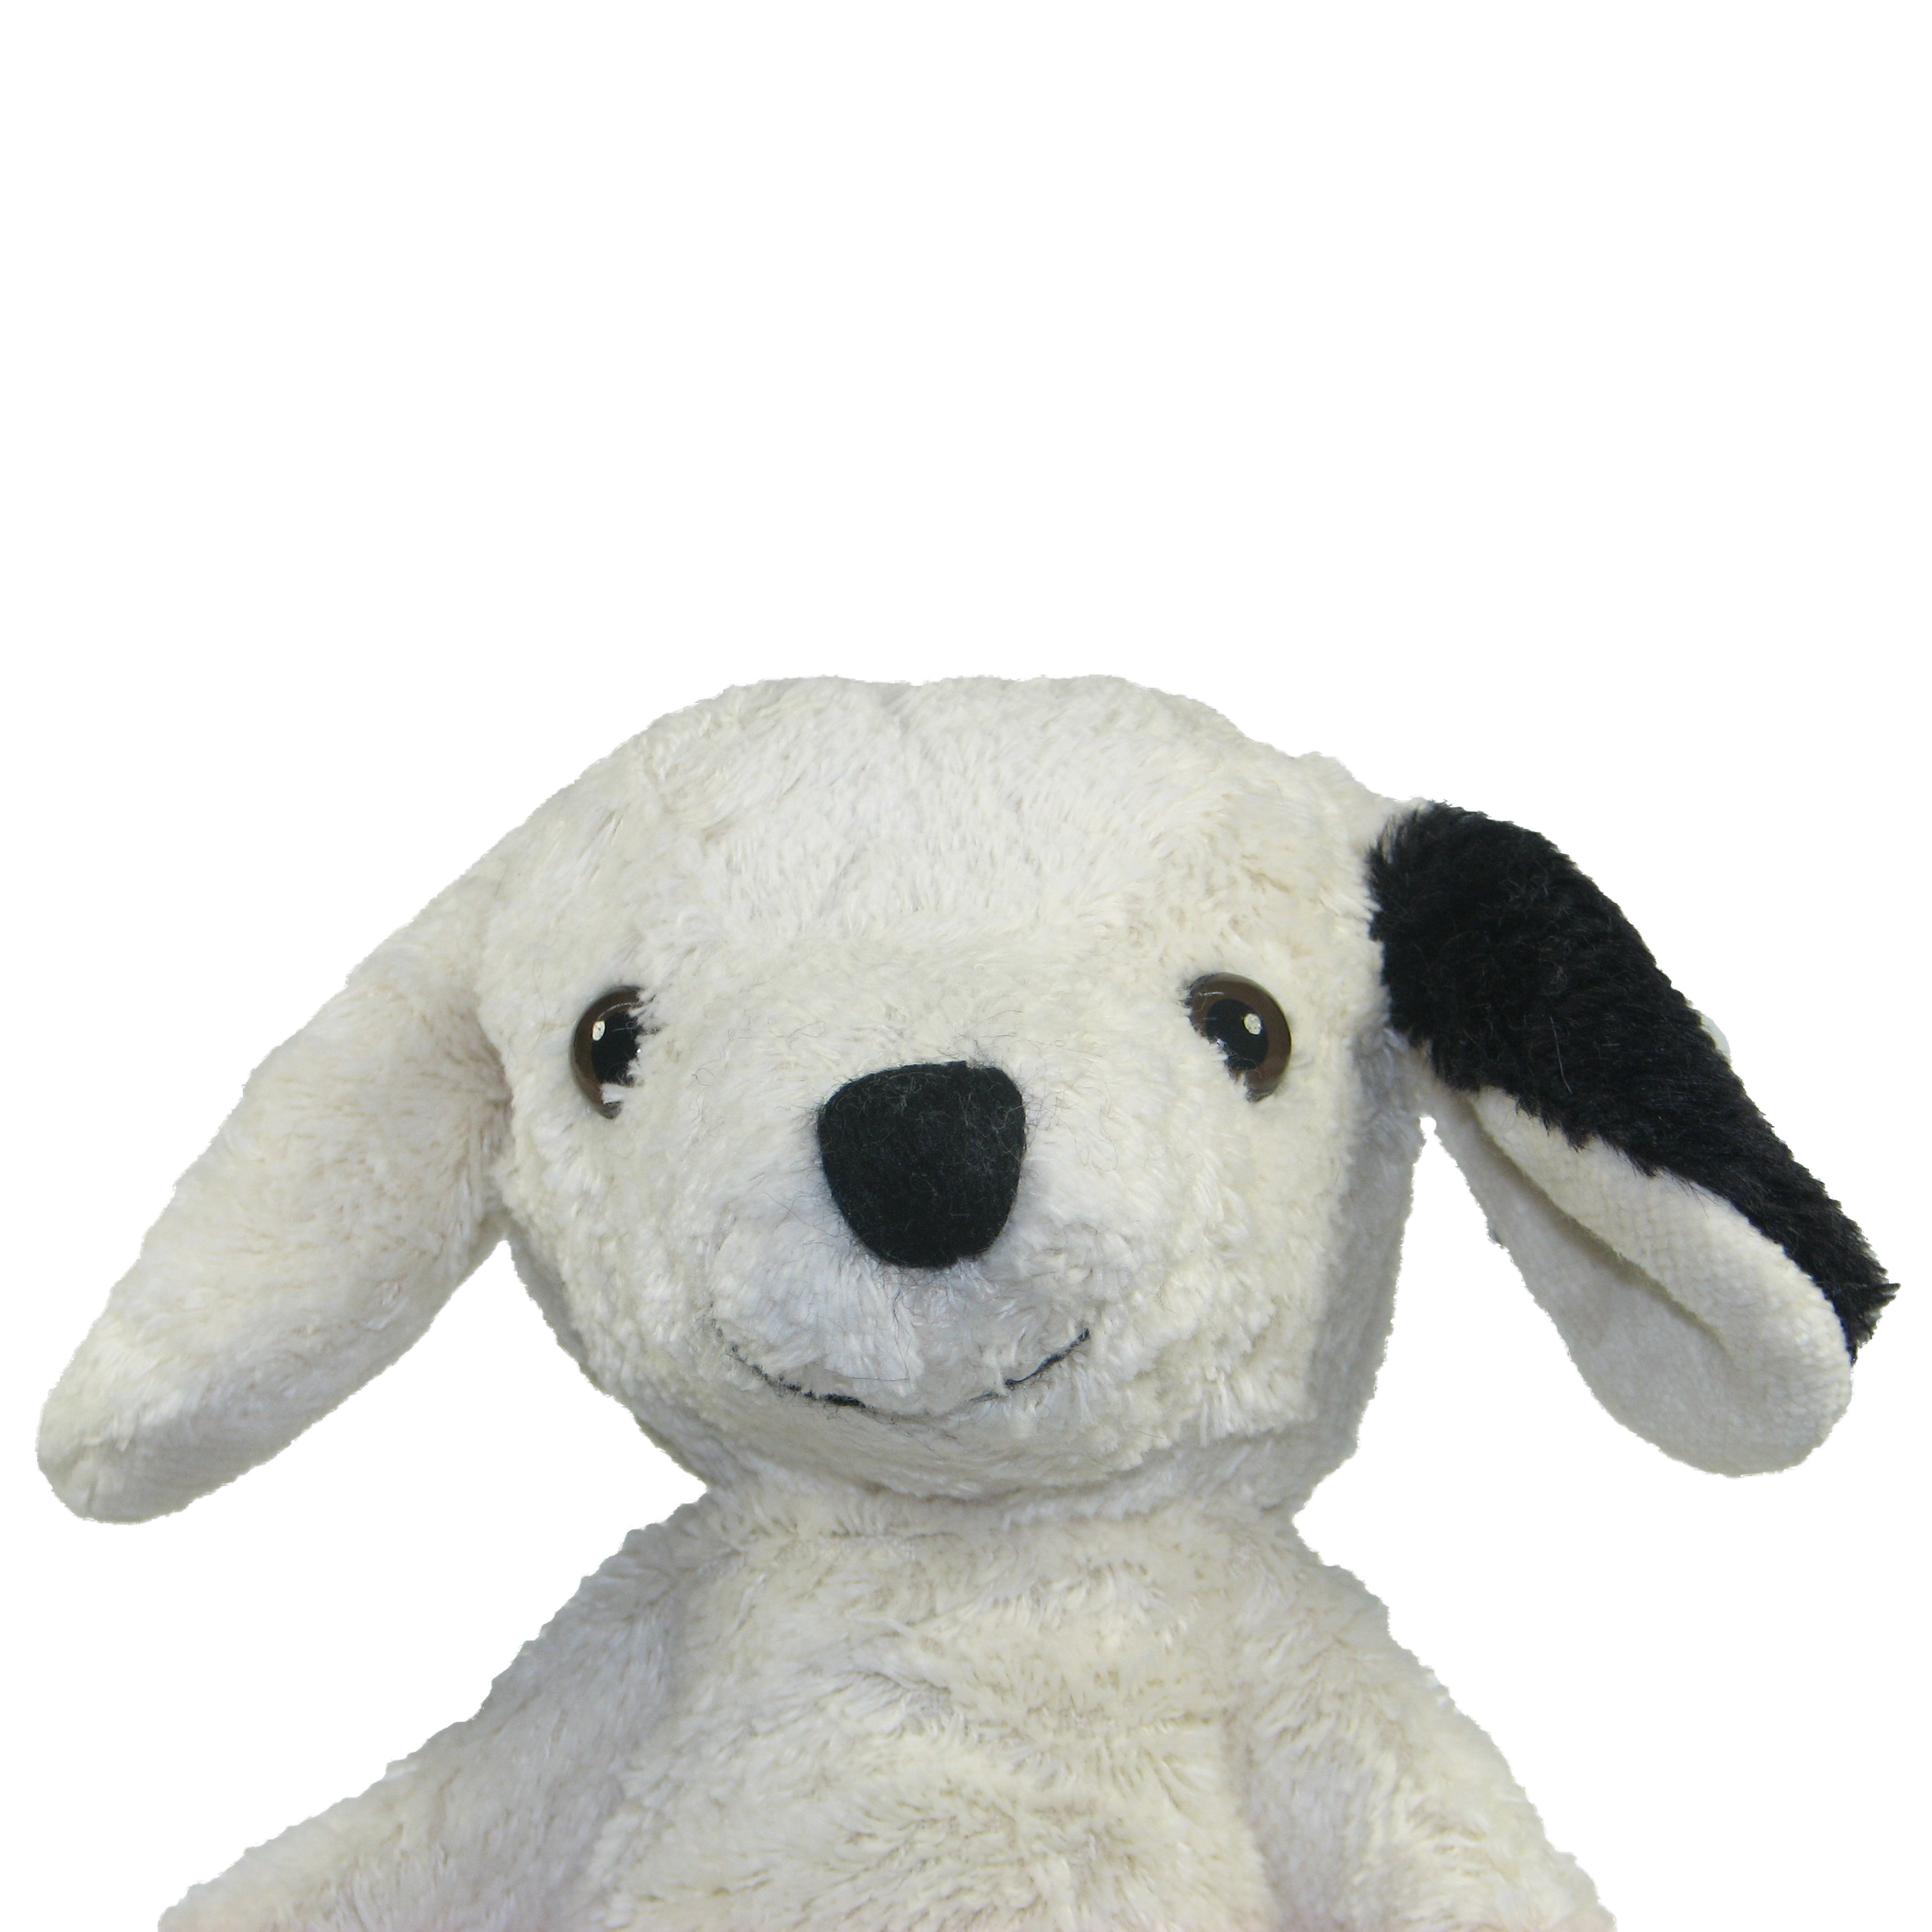 Hand puppet dog Bello - made of natural material - by Kallisto